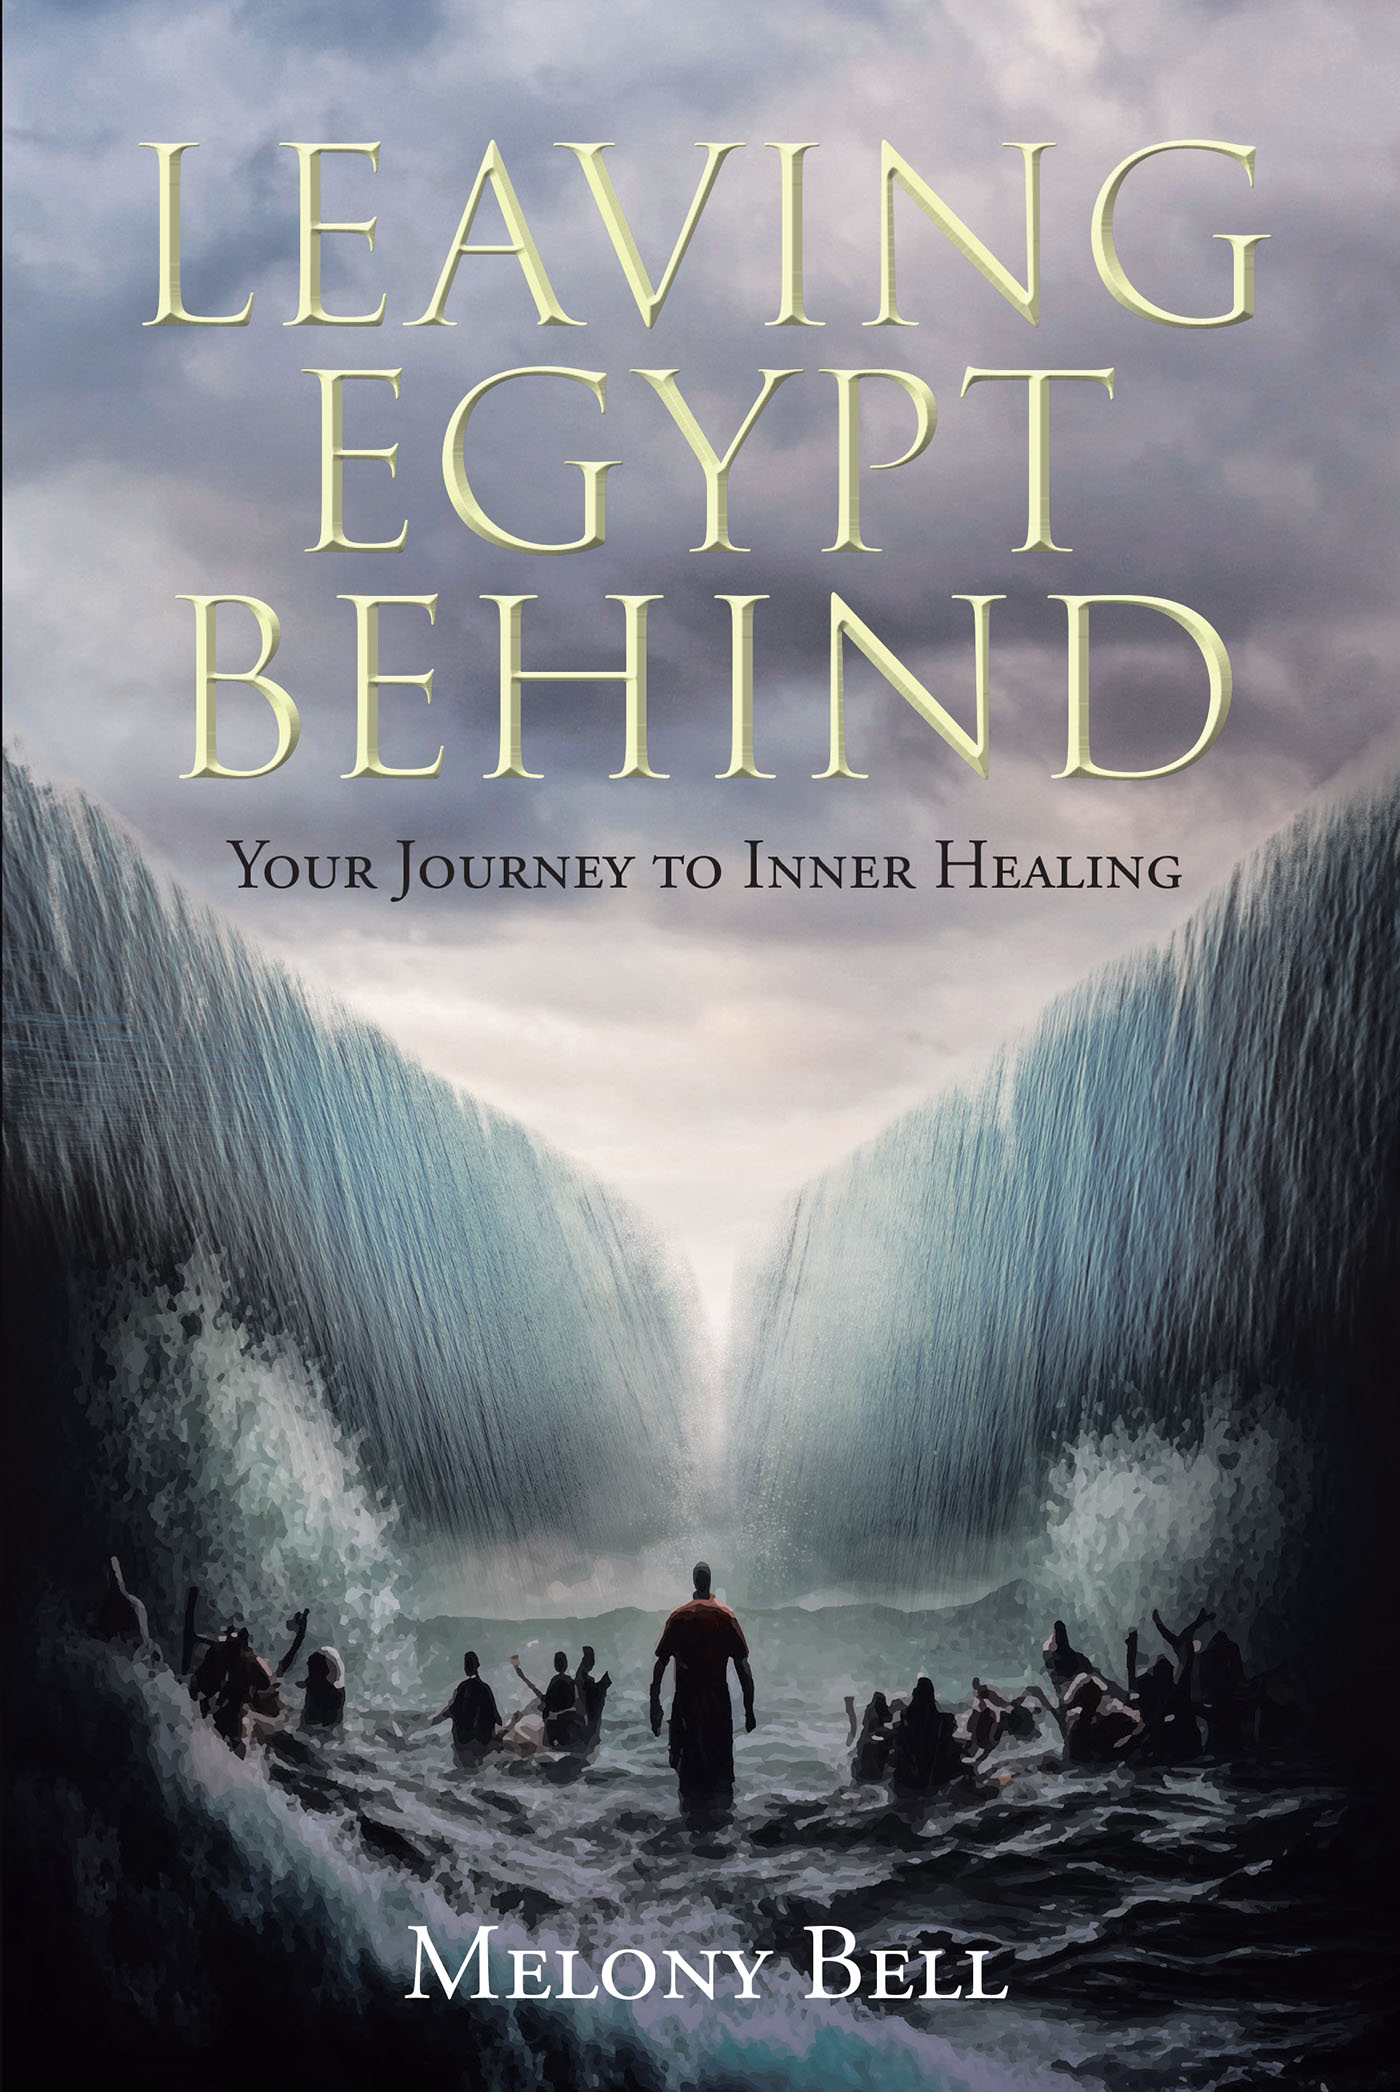 Melony Bell’s Newly Released “Leaving Egypt Behind: Your Journey to Inner Healing” is a Compassionate and Encouraging Discussion of Growing in Faith